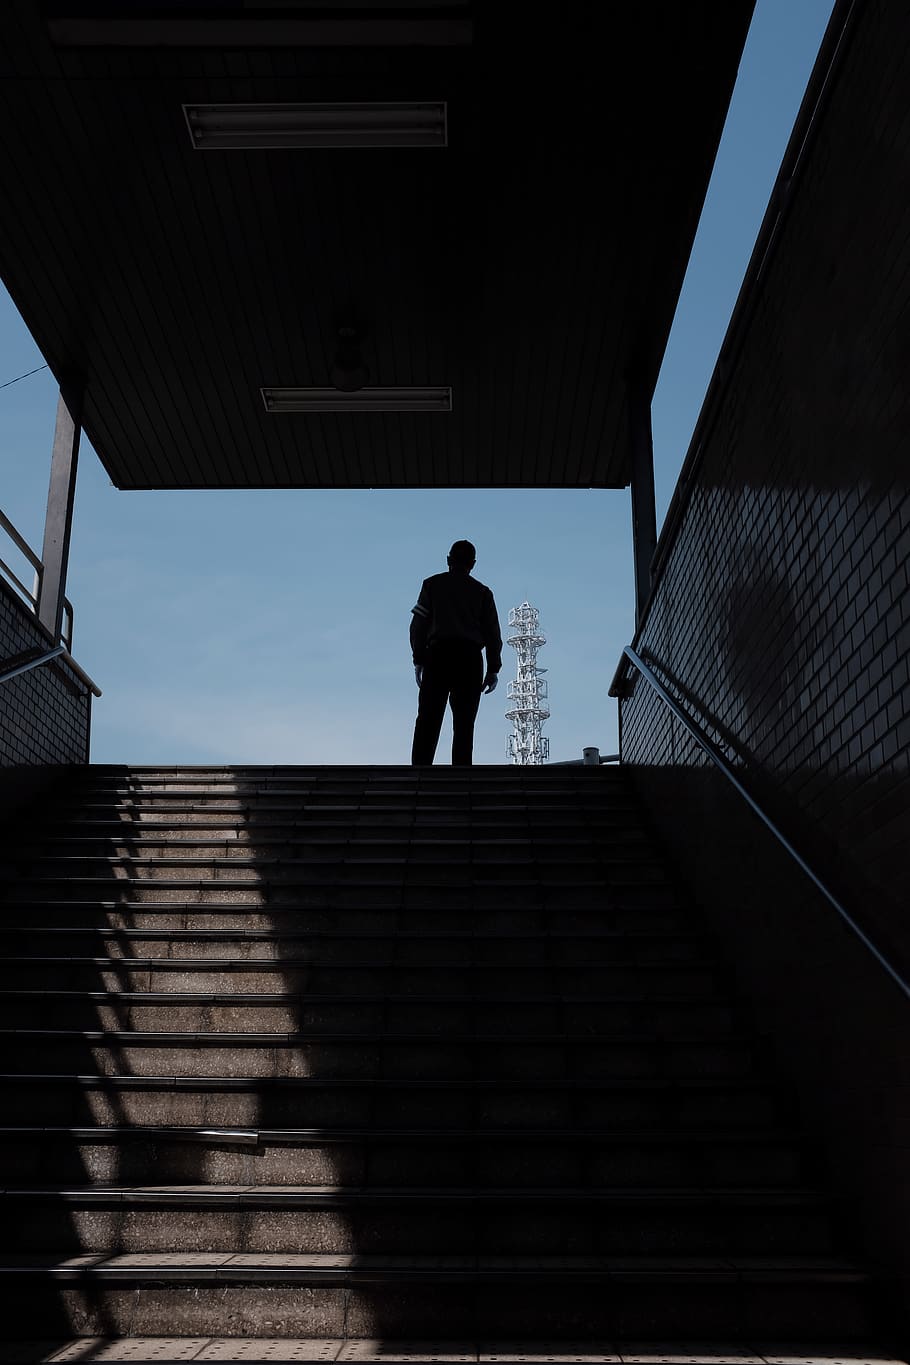 silhouette of man standing on stair, banister, handrail, human